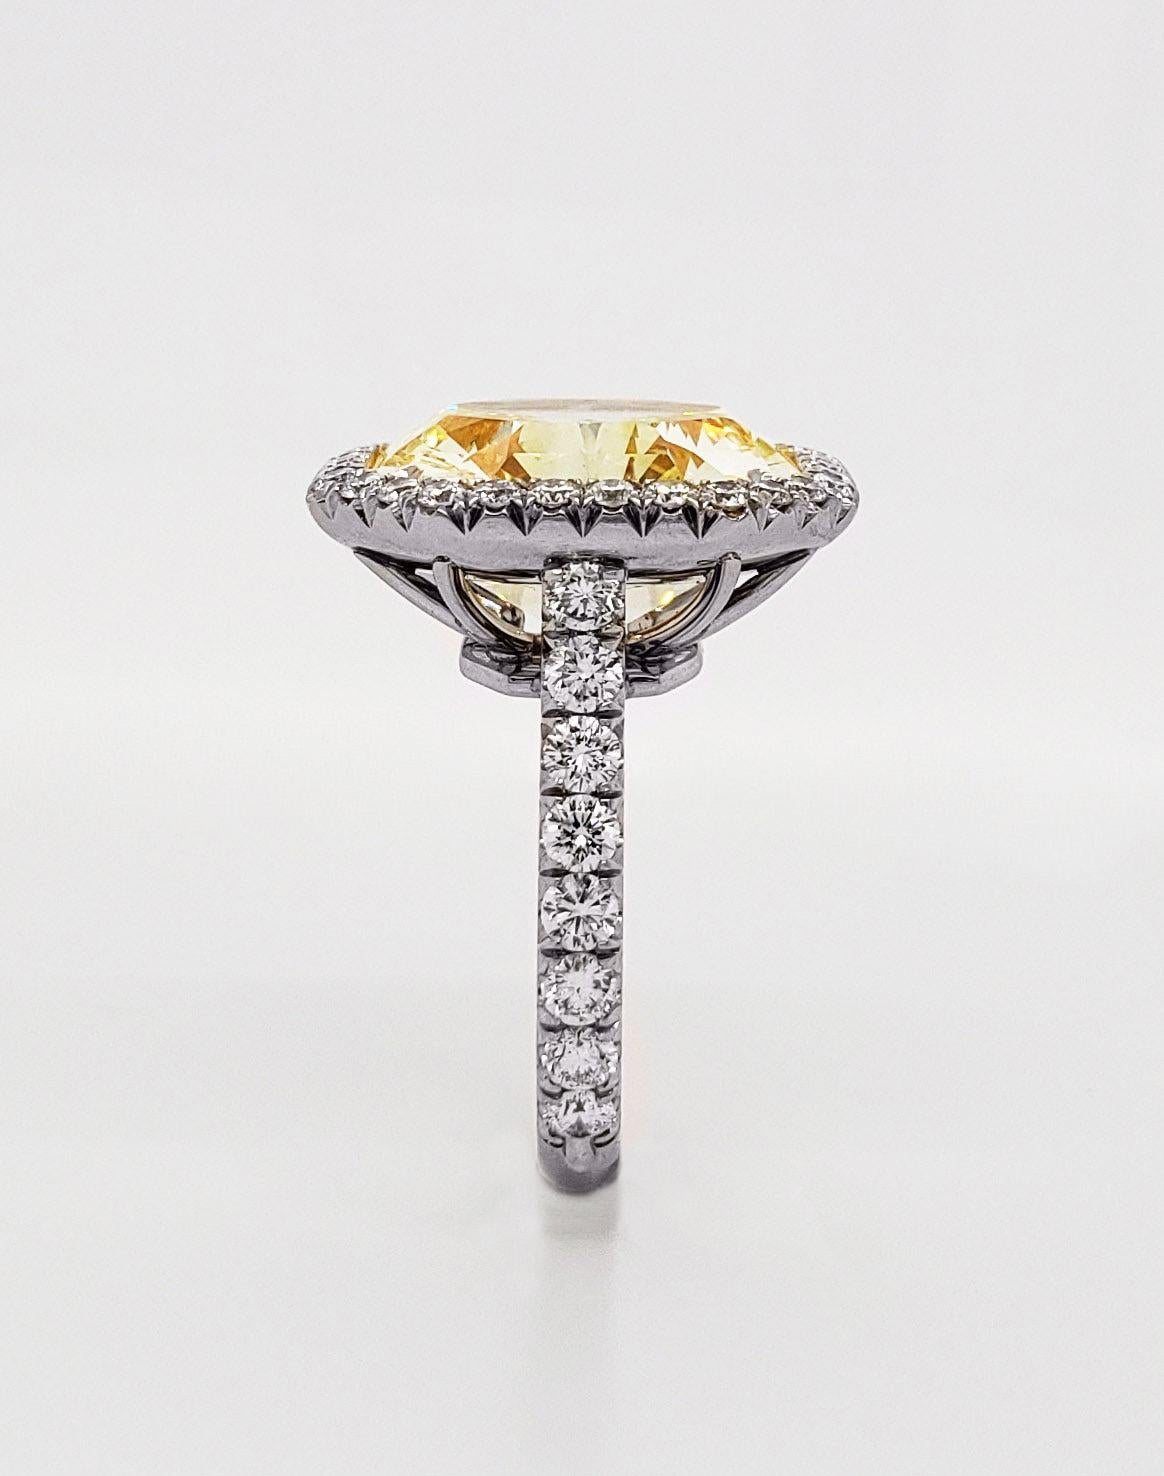 Contemporary Scarselli 15 Carat Fancy Intense Yellow Diamond Ring Internally Flawless GIA For Sale